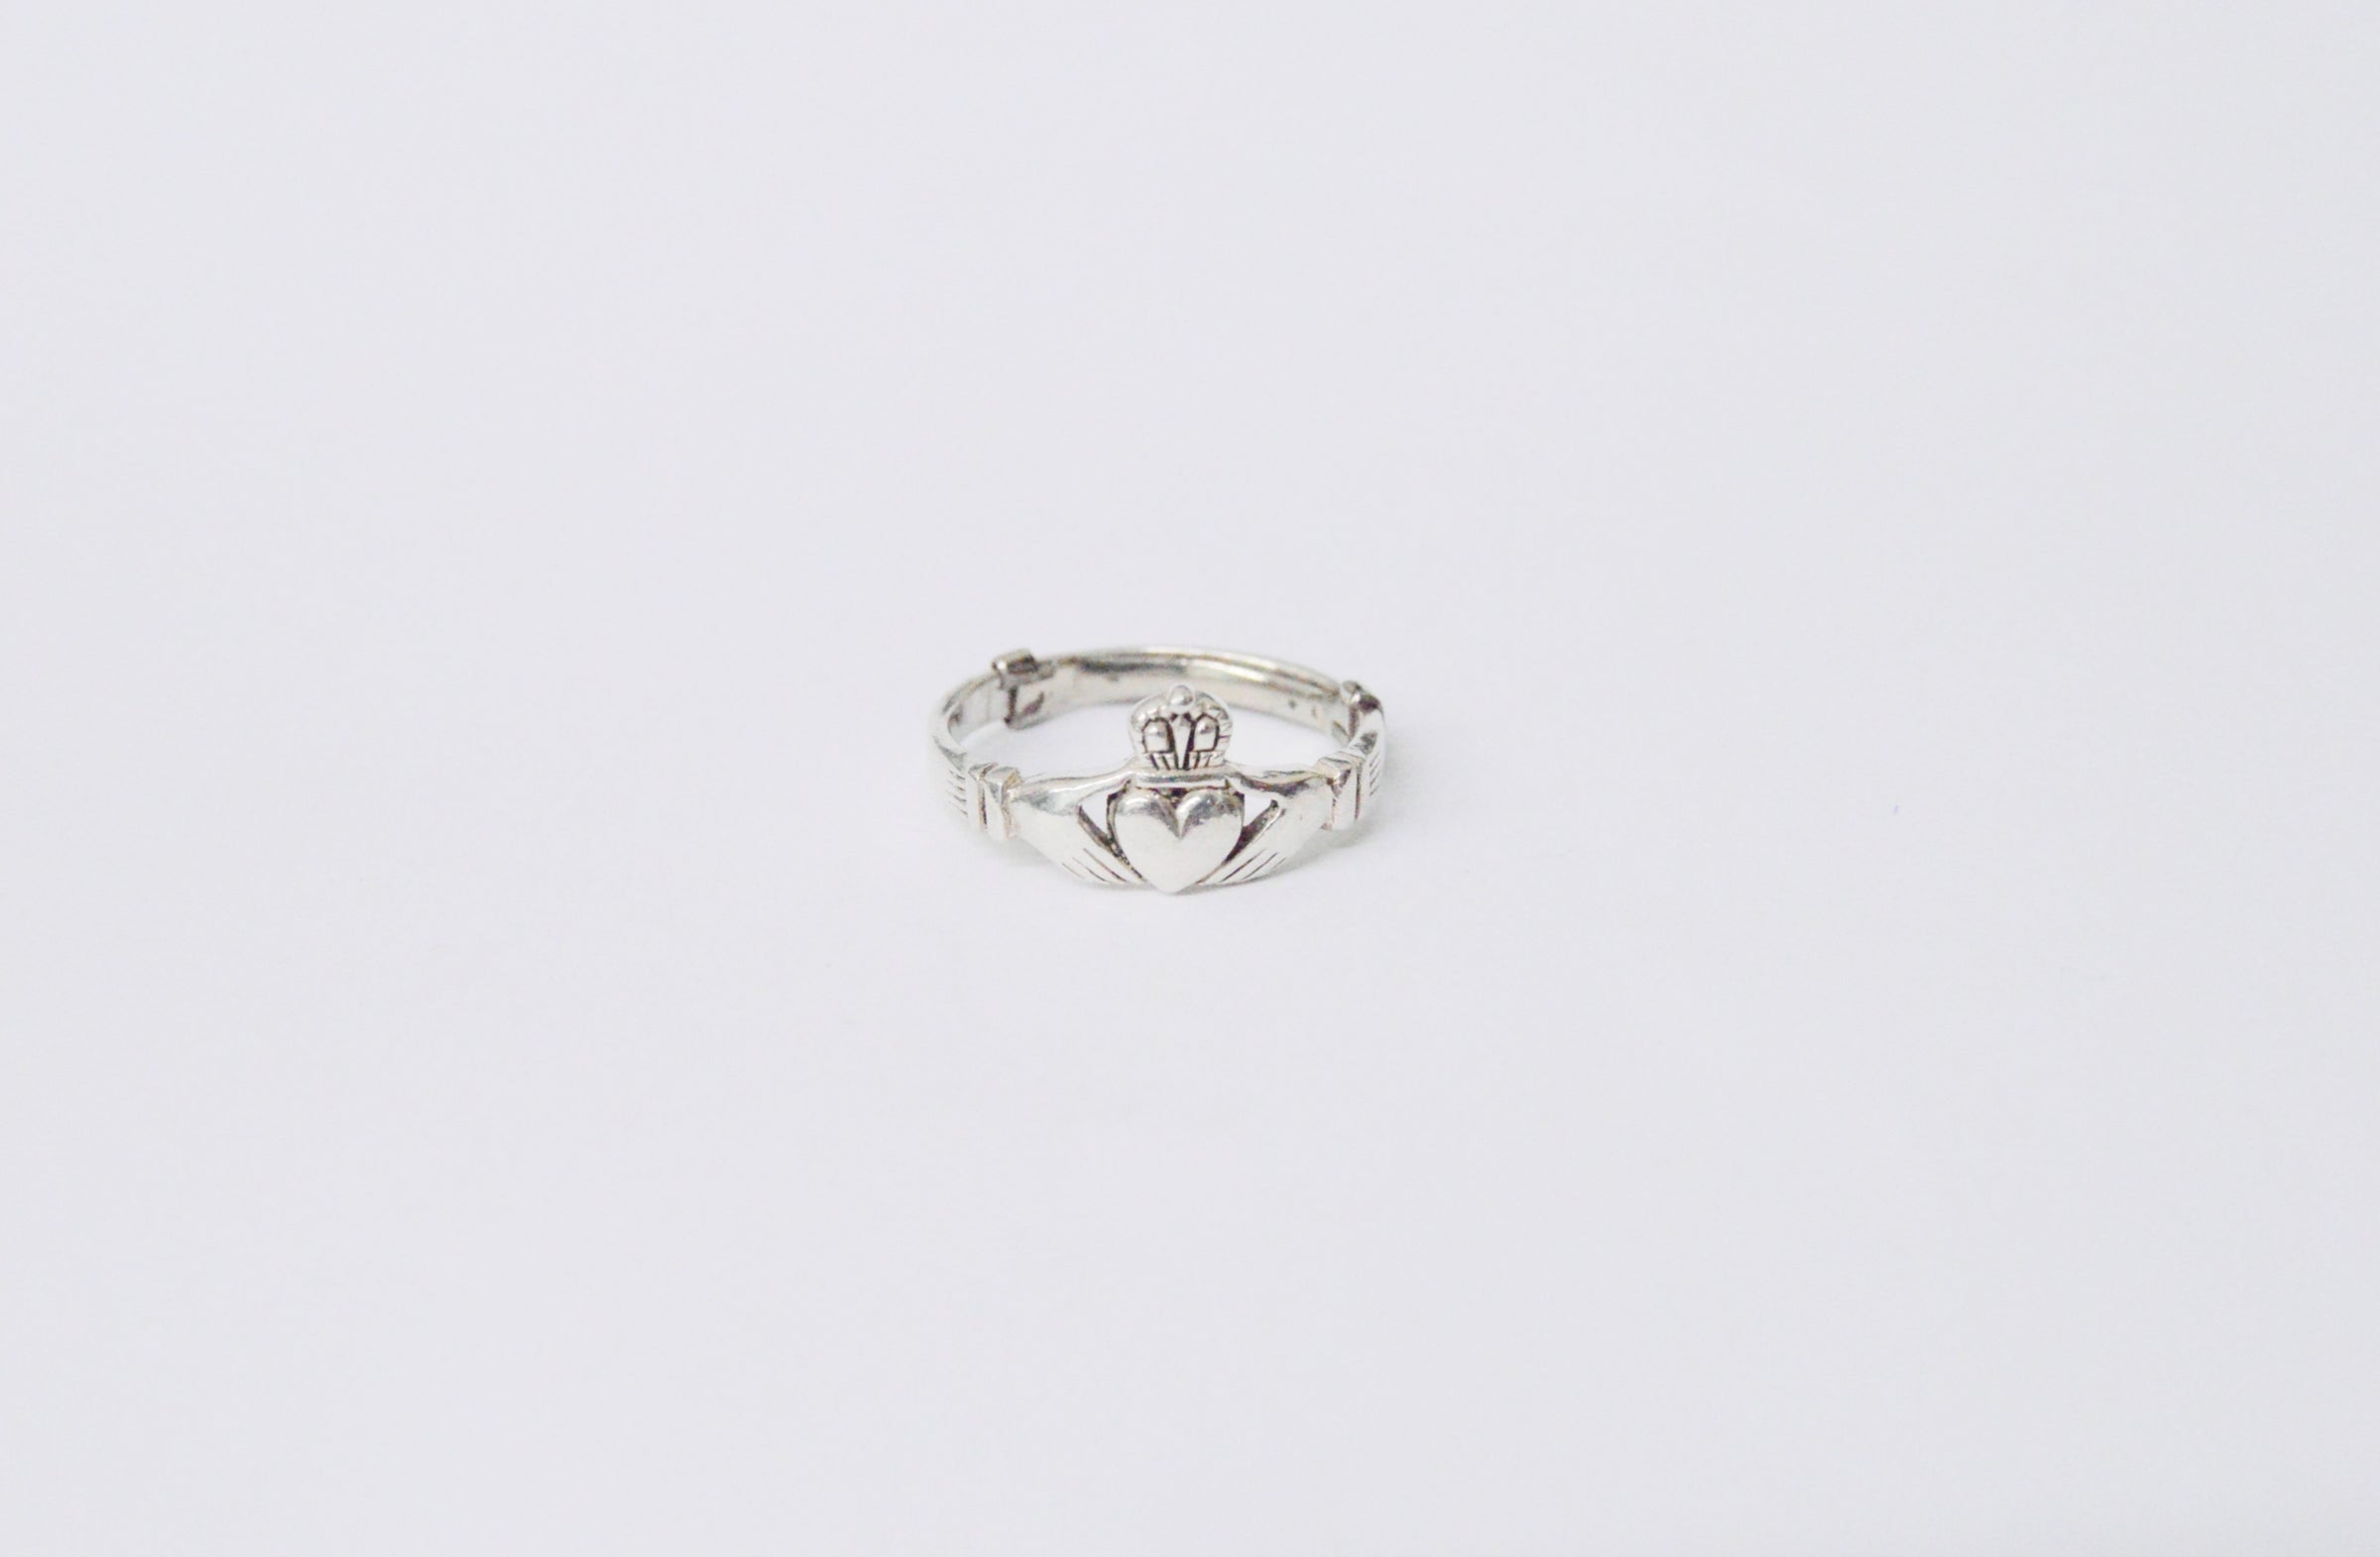 Irish Claddagh .925 Sterling Silver Ring www.hersandhistreasures.com/collections/sterling-silver-jewelry